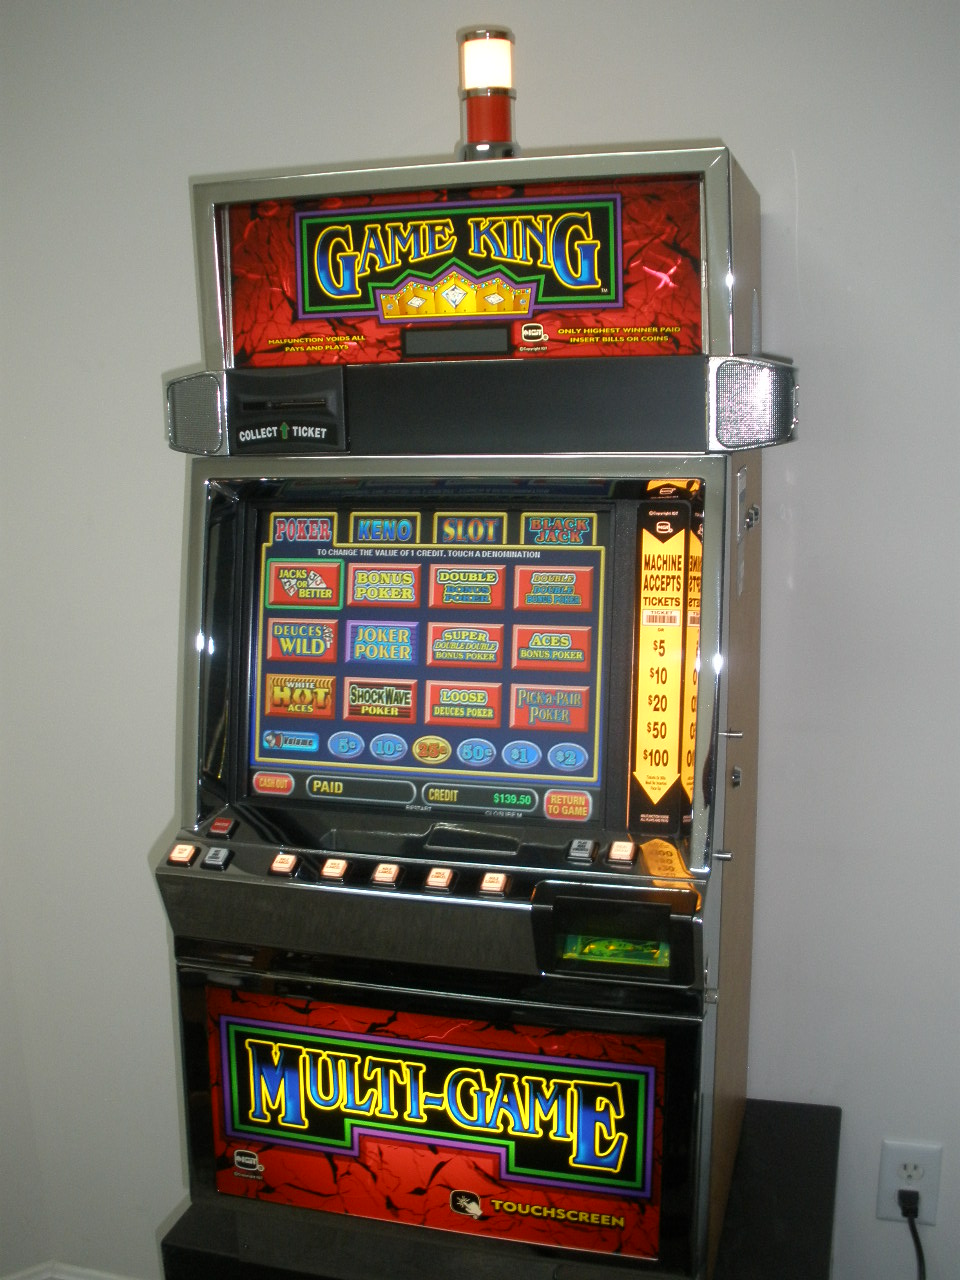 IGT GAME KING 6.2 MULTI GAME VIDEO POKER with LCD ...